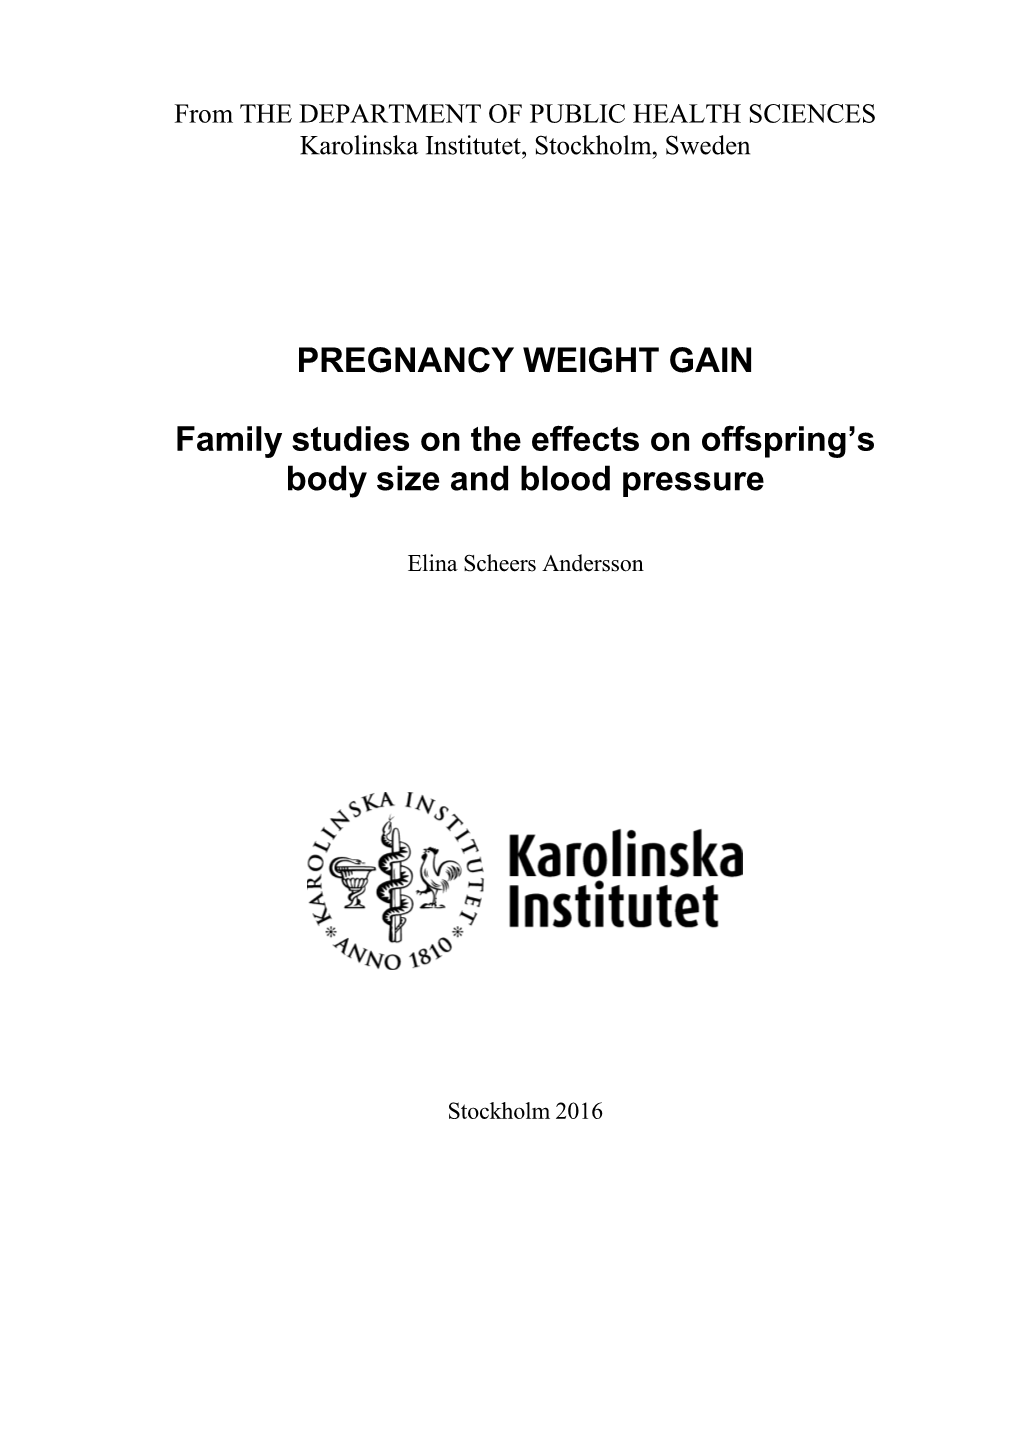 PREGNANCY WEIGHT GAIN Family Studies on the Effects on Offspring's Body Size and Blood Pressure